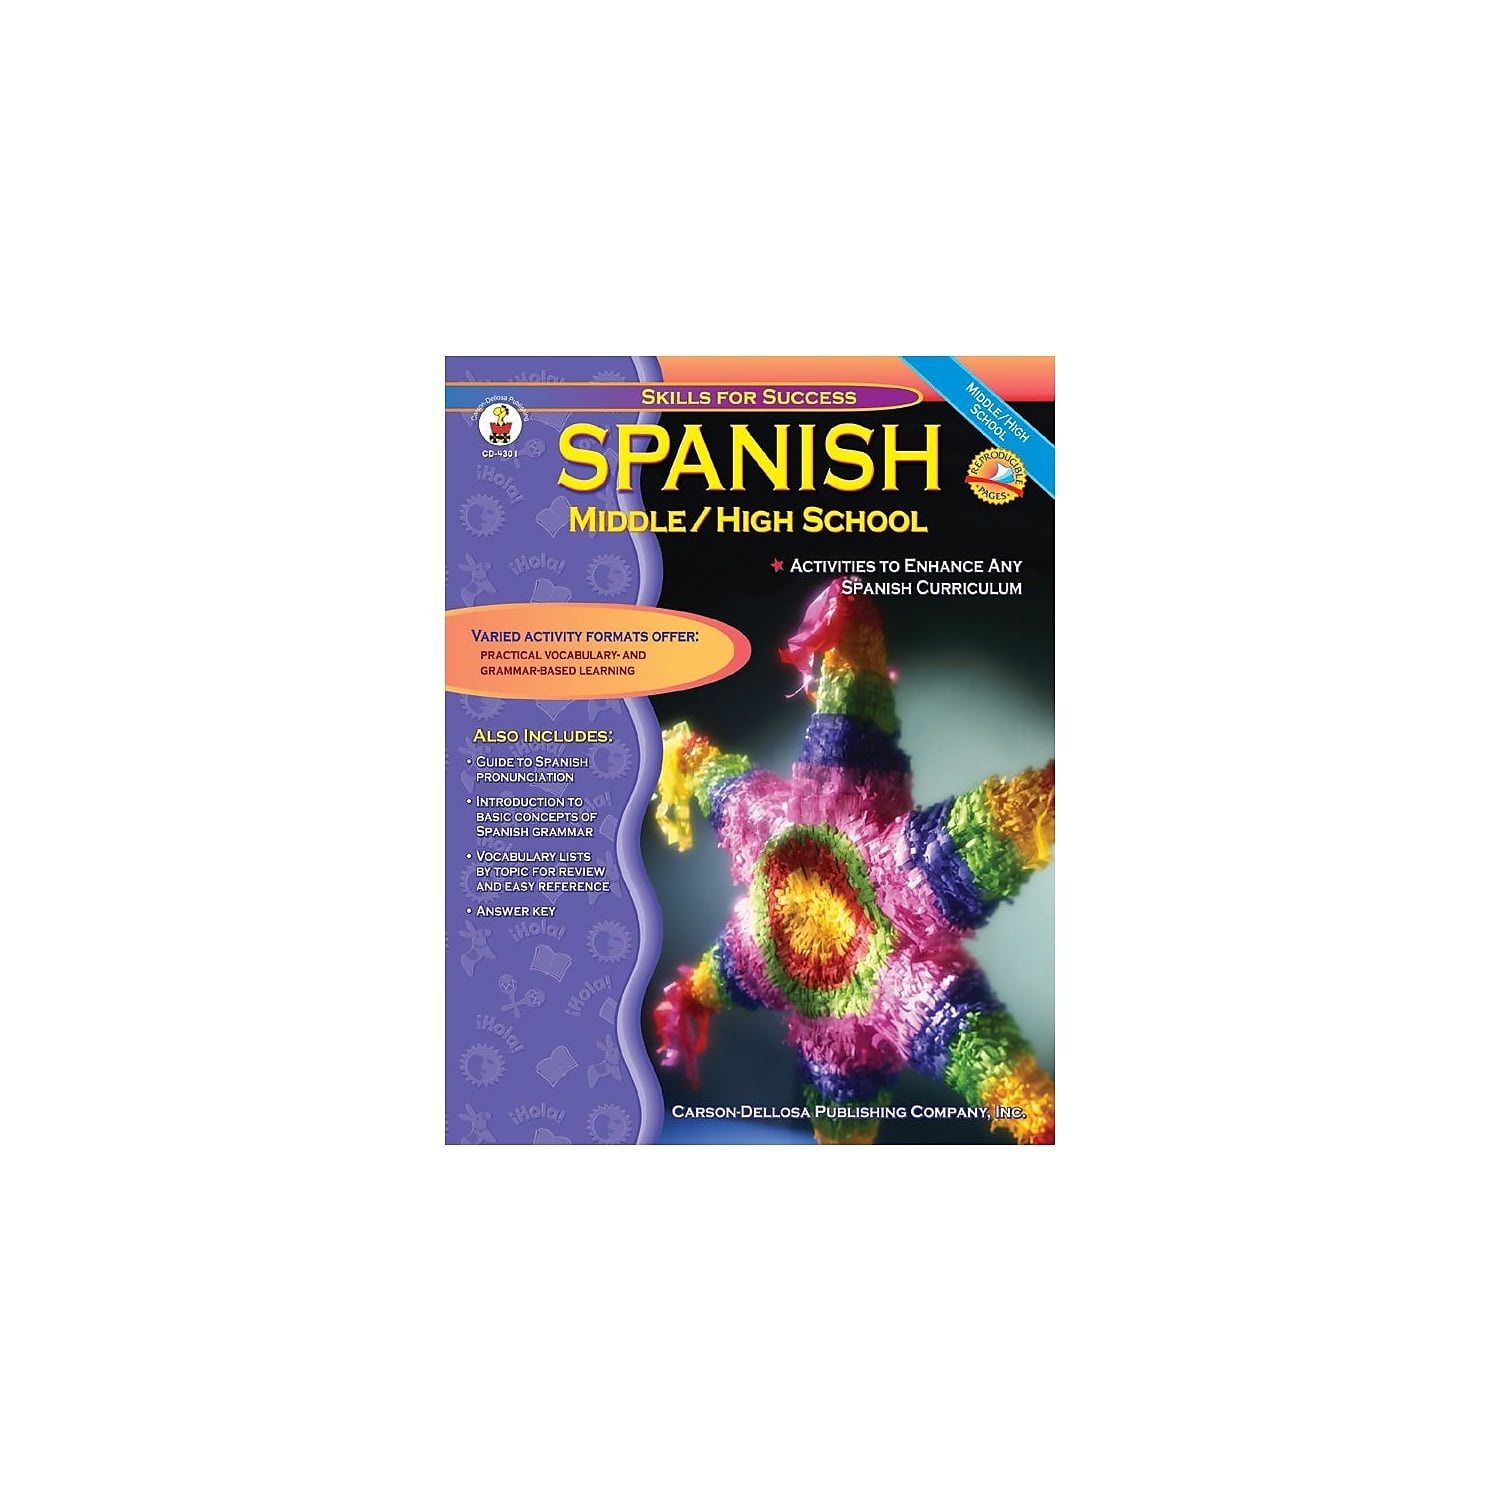 Adapting Education: Spanish Lessons for All Learning Styles